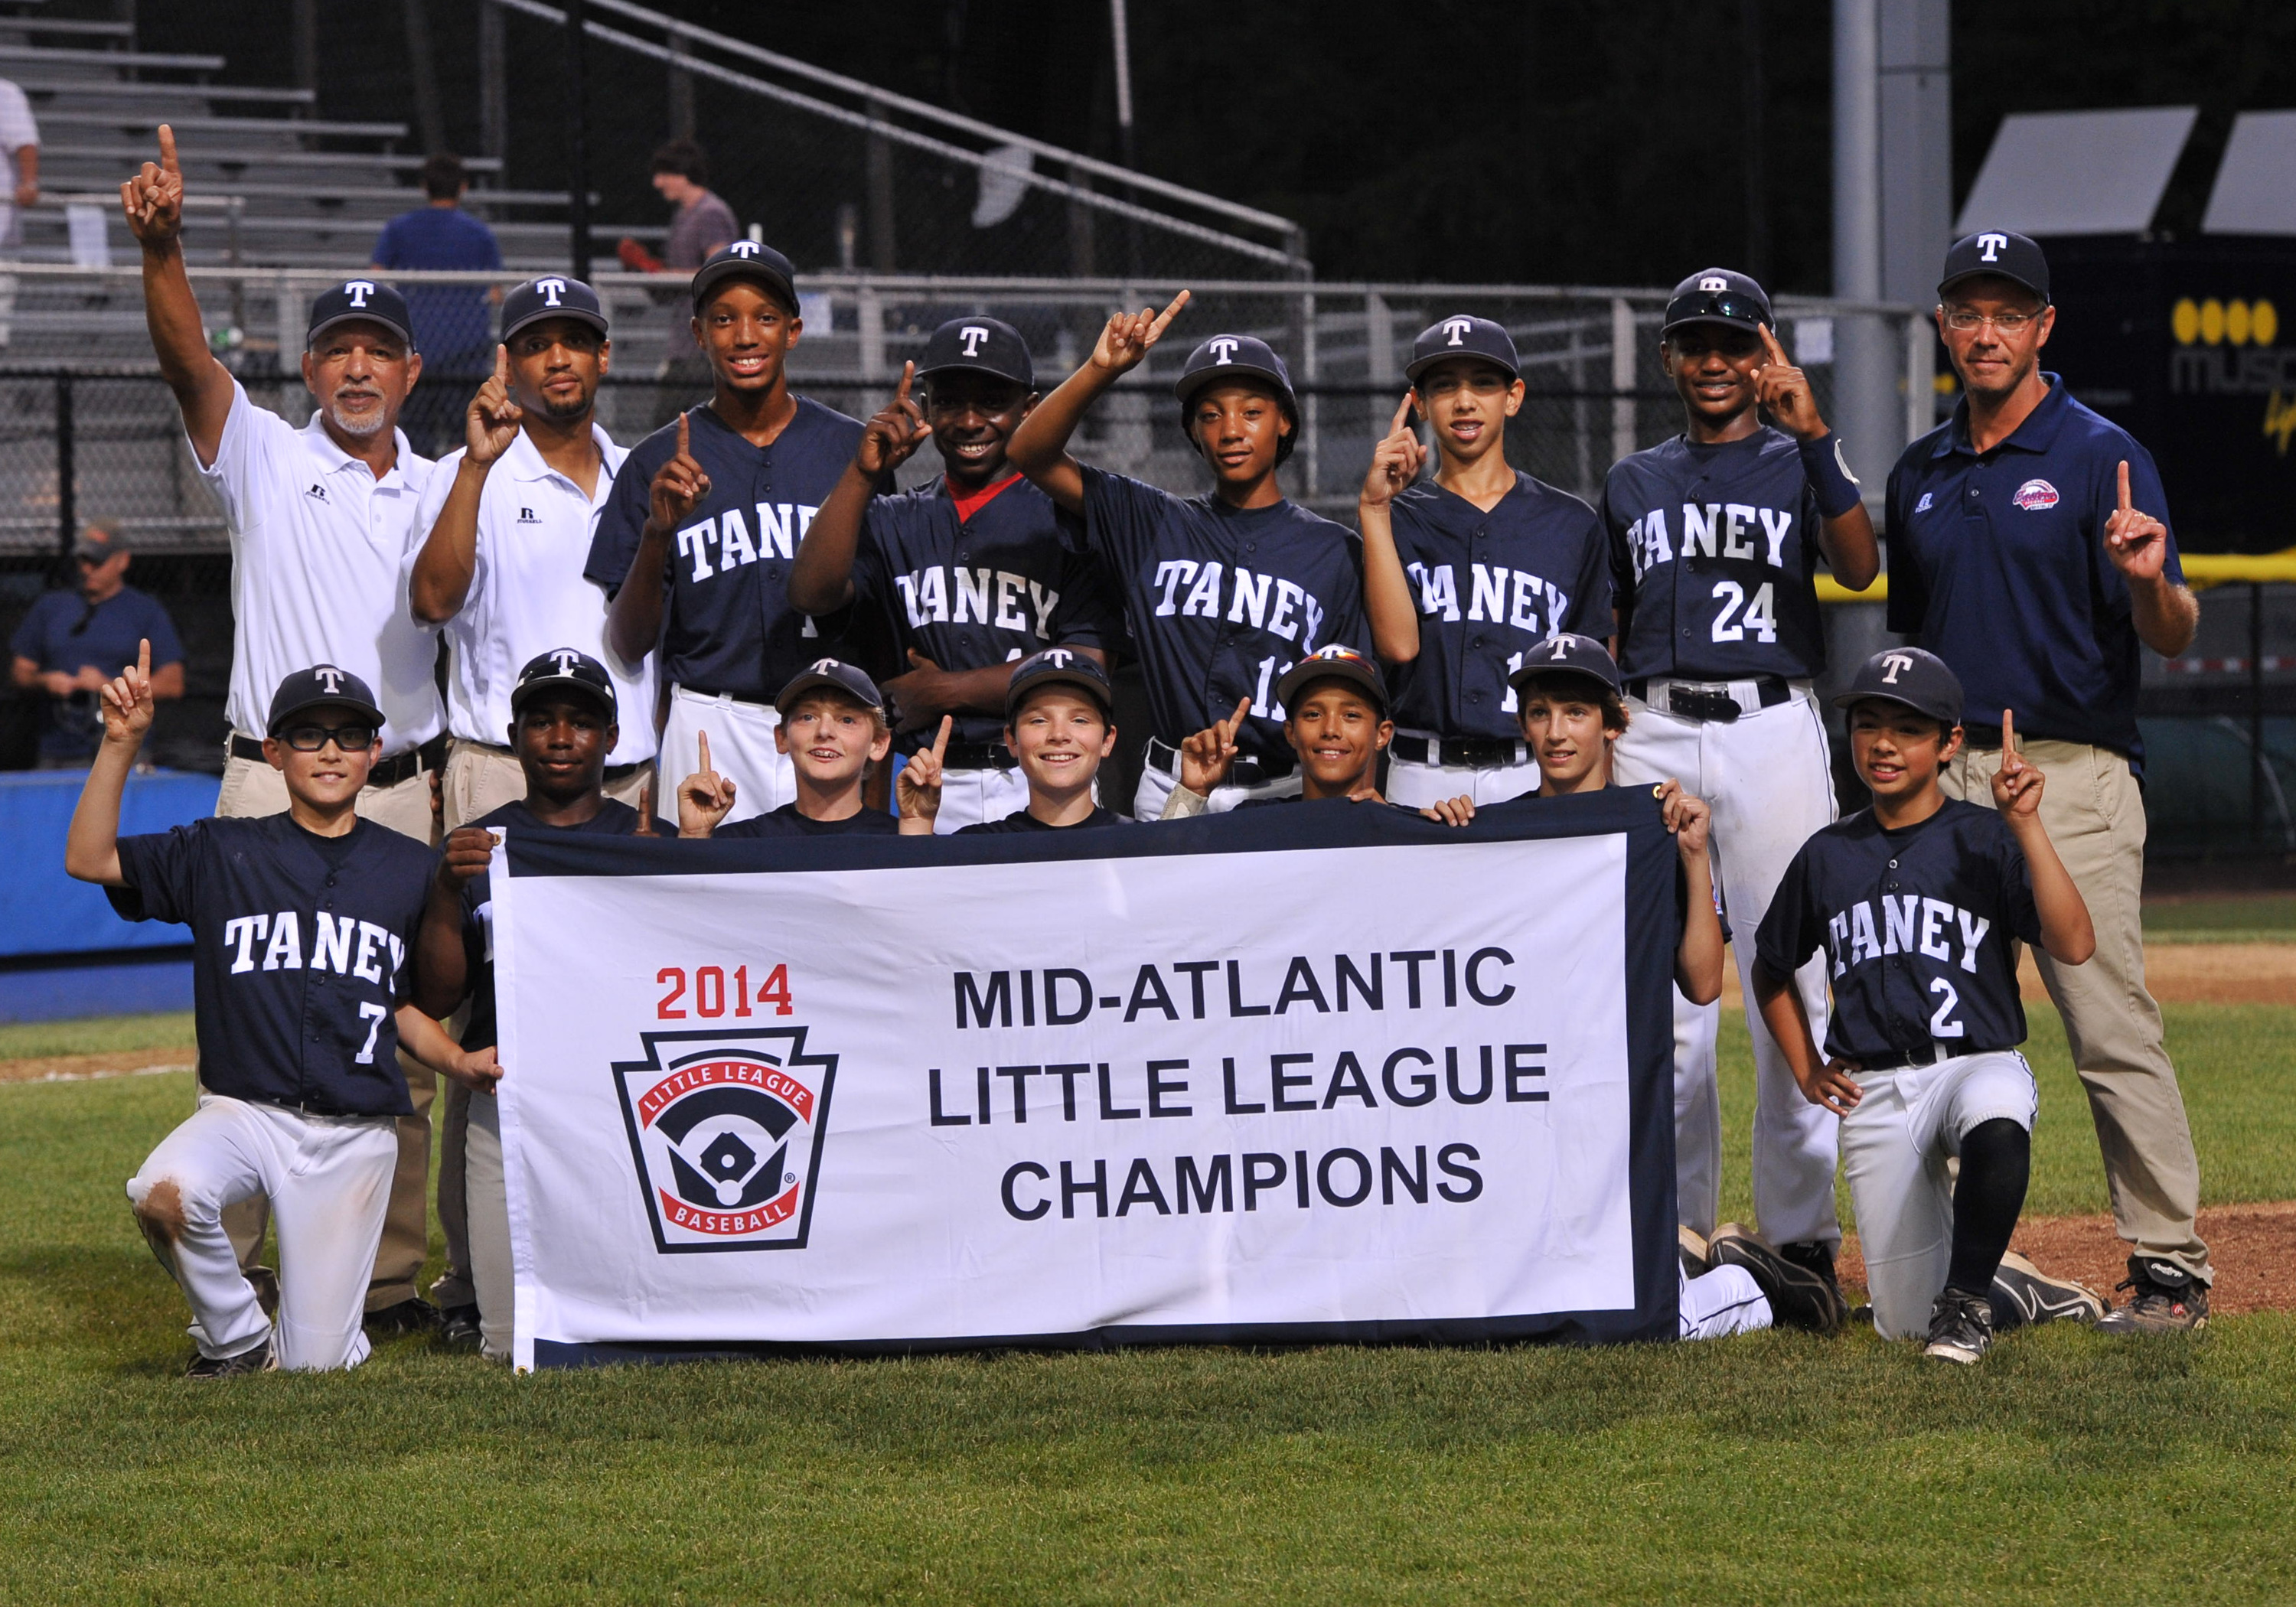 After Mo'ne's Taney Youth Little League team beat Delaware 8-0 in the 2014 Mid Atlantic Championship game Aug. 10. (Photo: Newscom)